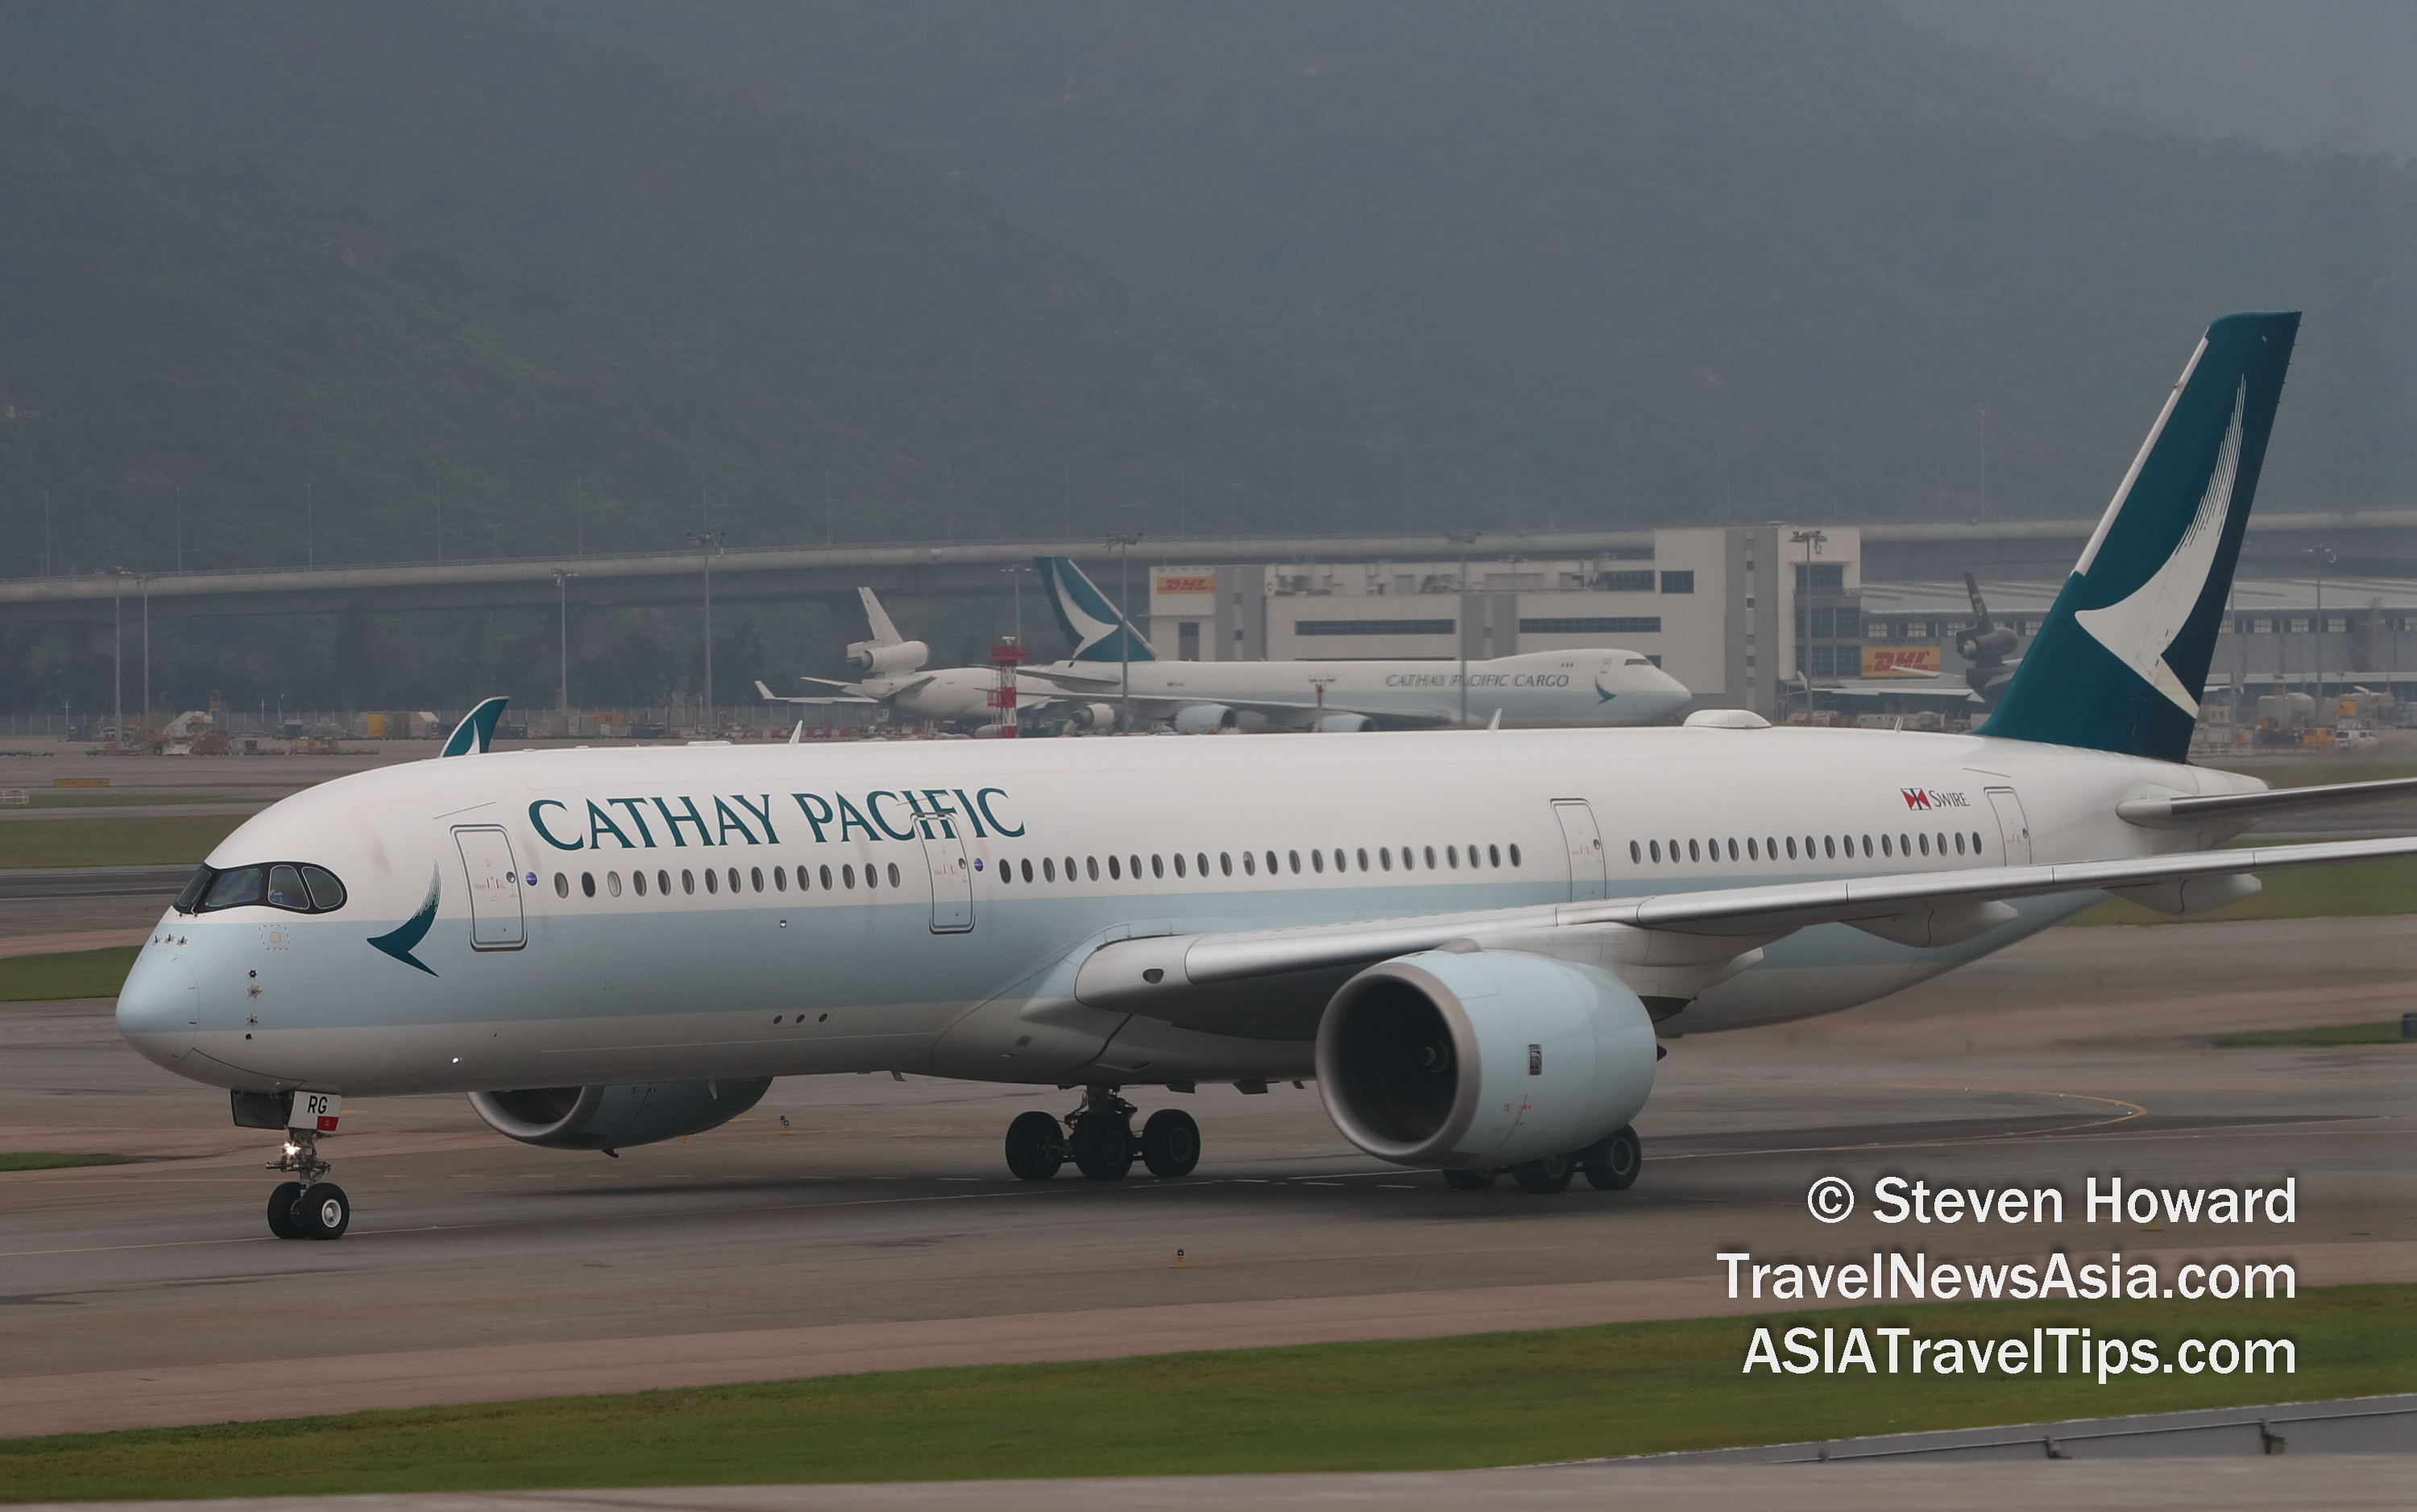 Cathay Pacific Airbus A350 in the foreground and a Cathay Pacific Cargo Boeing 747F in the background at HKIA. Picture by Steven Howard of TravelNewsAsia.com Click to enlarge.